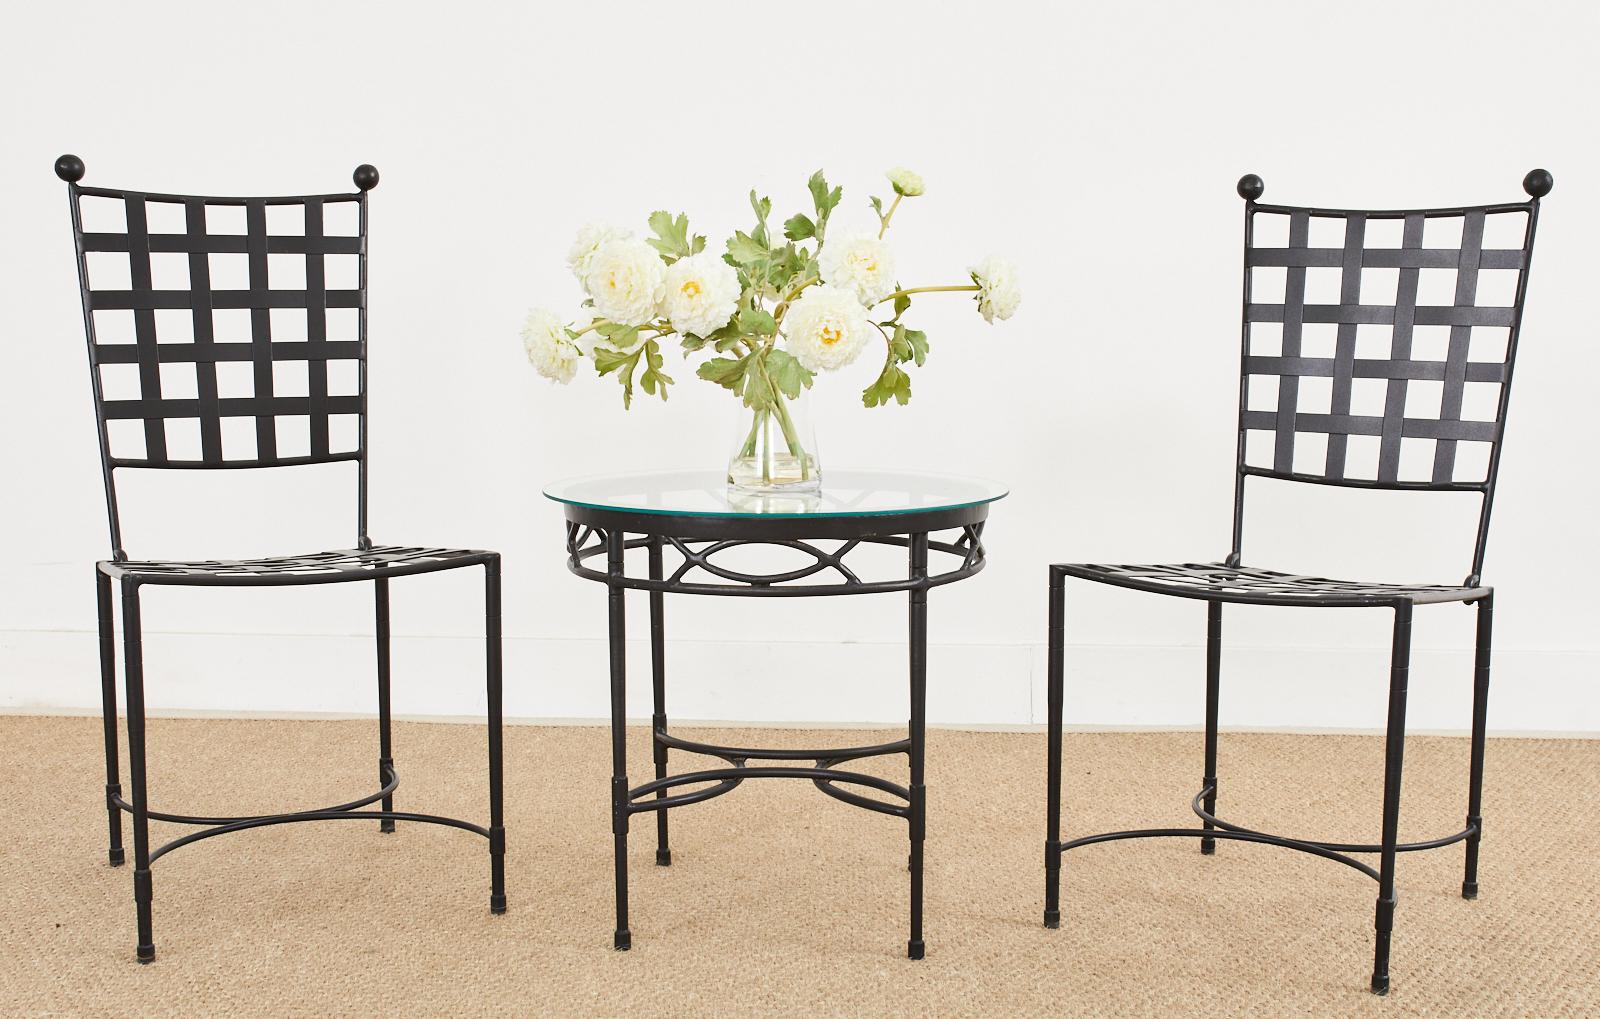 Stylish black iron patio and garden drink table made in the style and manner of Mario Papperzini for John Salterini. Iconic mid-century modern design attributed to Janus et Cie from their Amalfi collection. The round frame has straight legs